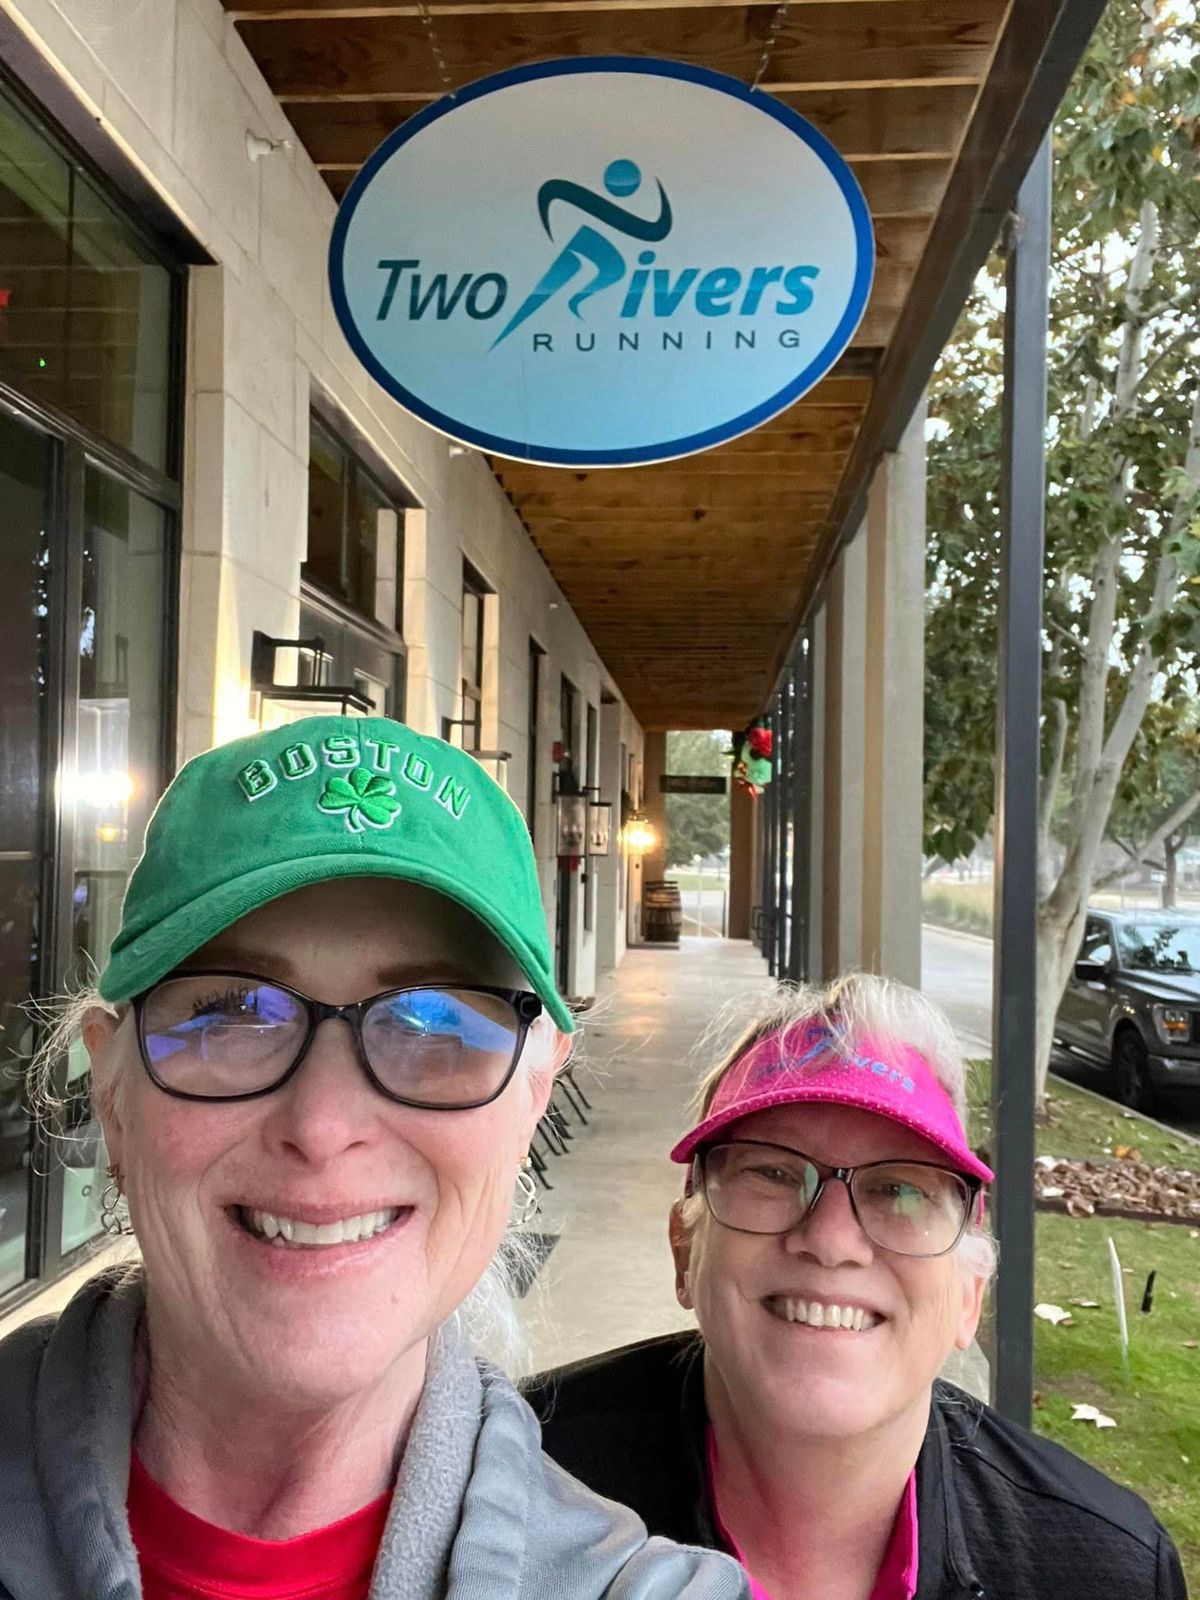 Monday 7:30 am walk at Two Rivers Running